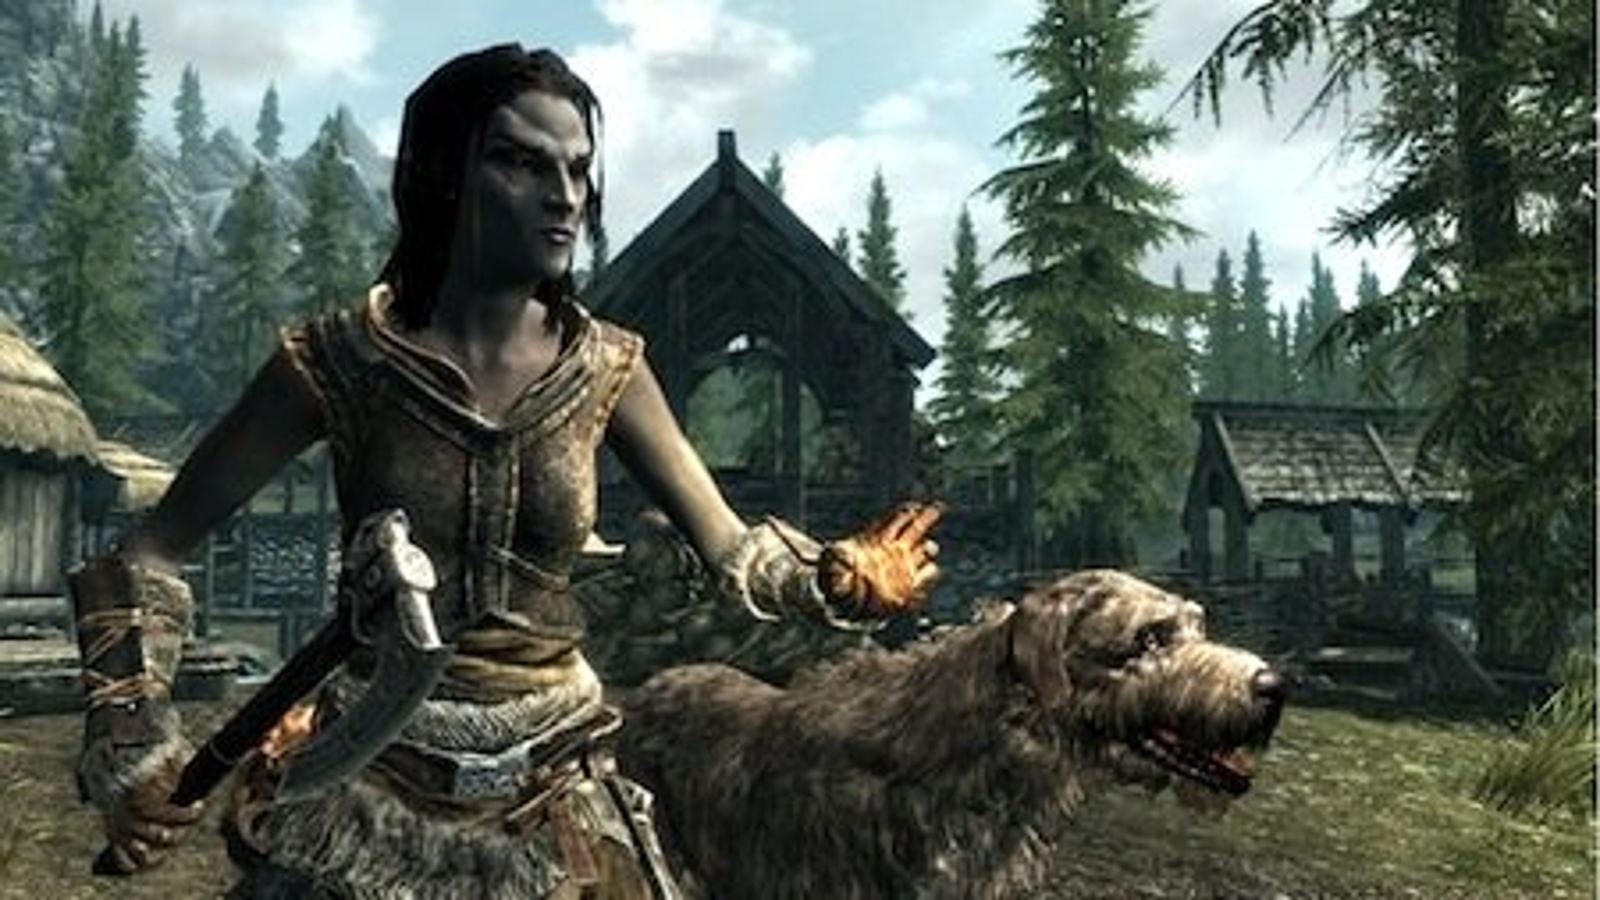 Skyrim collections